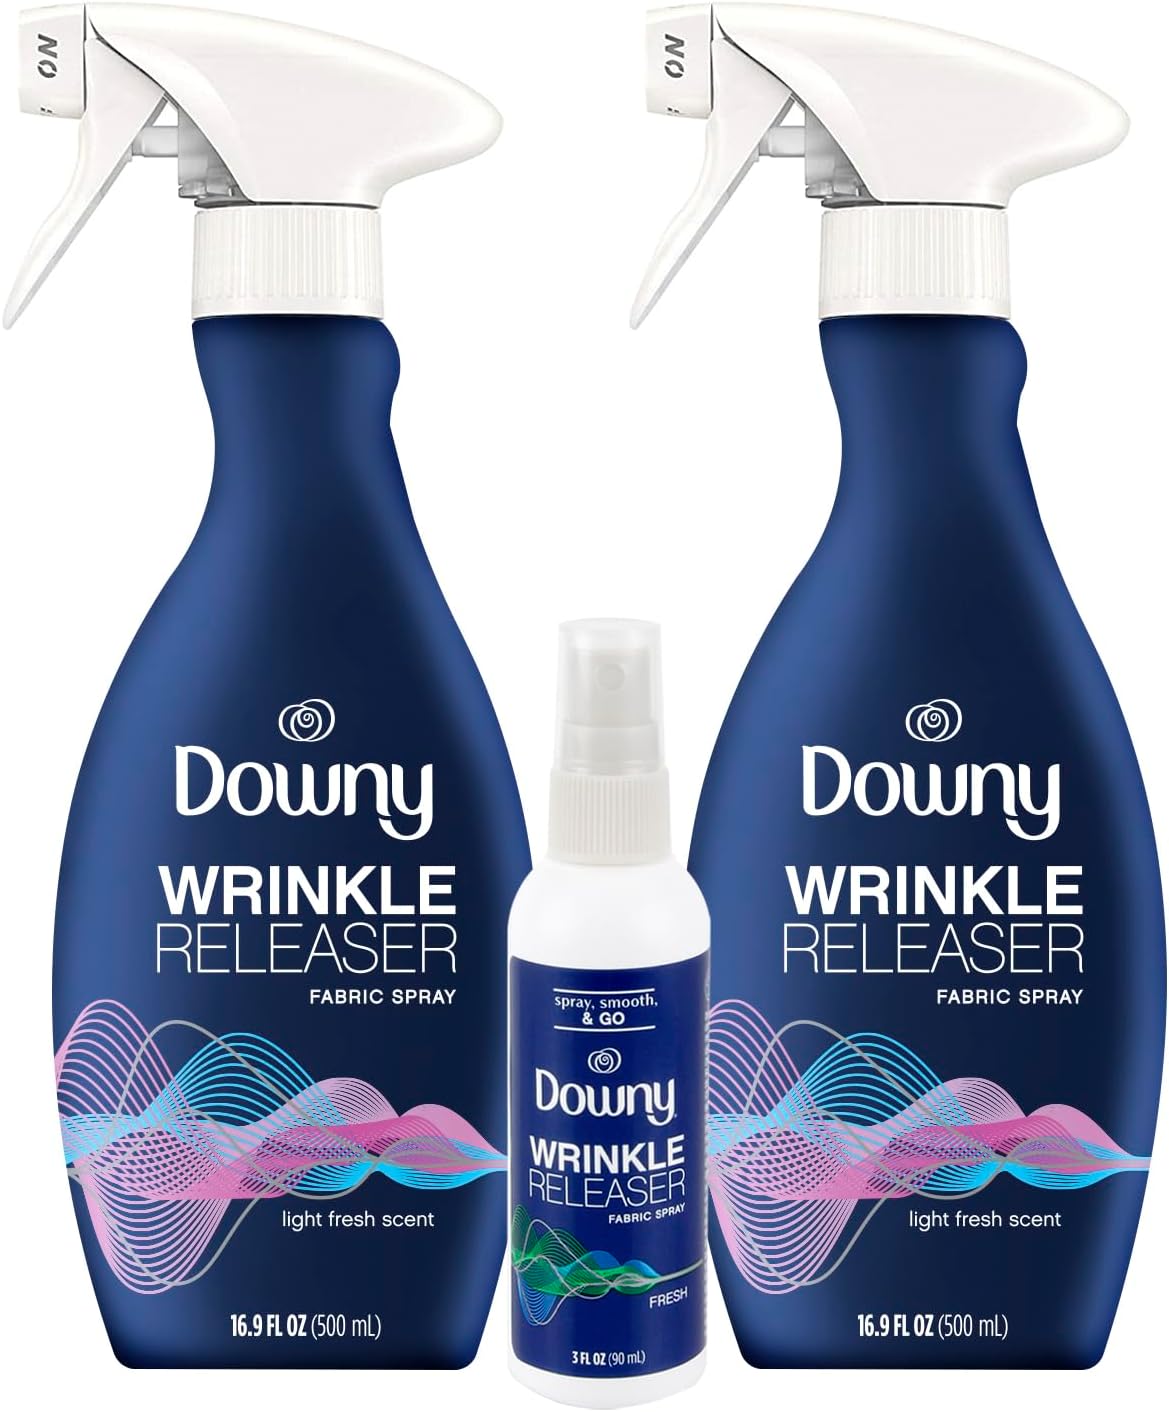 Downy Wrinkle Releaser Fabric Refresher Spray, Odor Eliminator, Ironing Aid and Anti Static Spray, Light Fresh Scent, 33.8 Fl Oz (Pack of 2) + Travel Size Spray